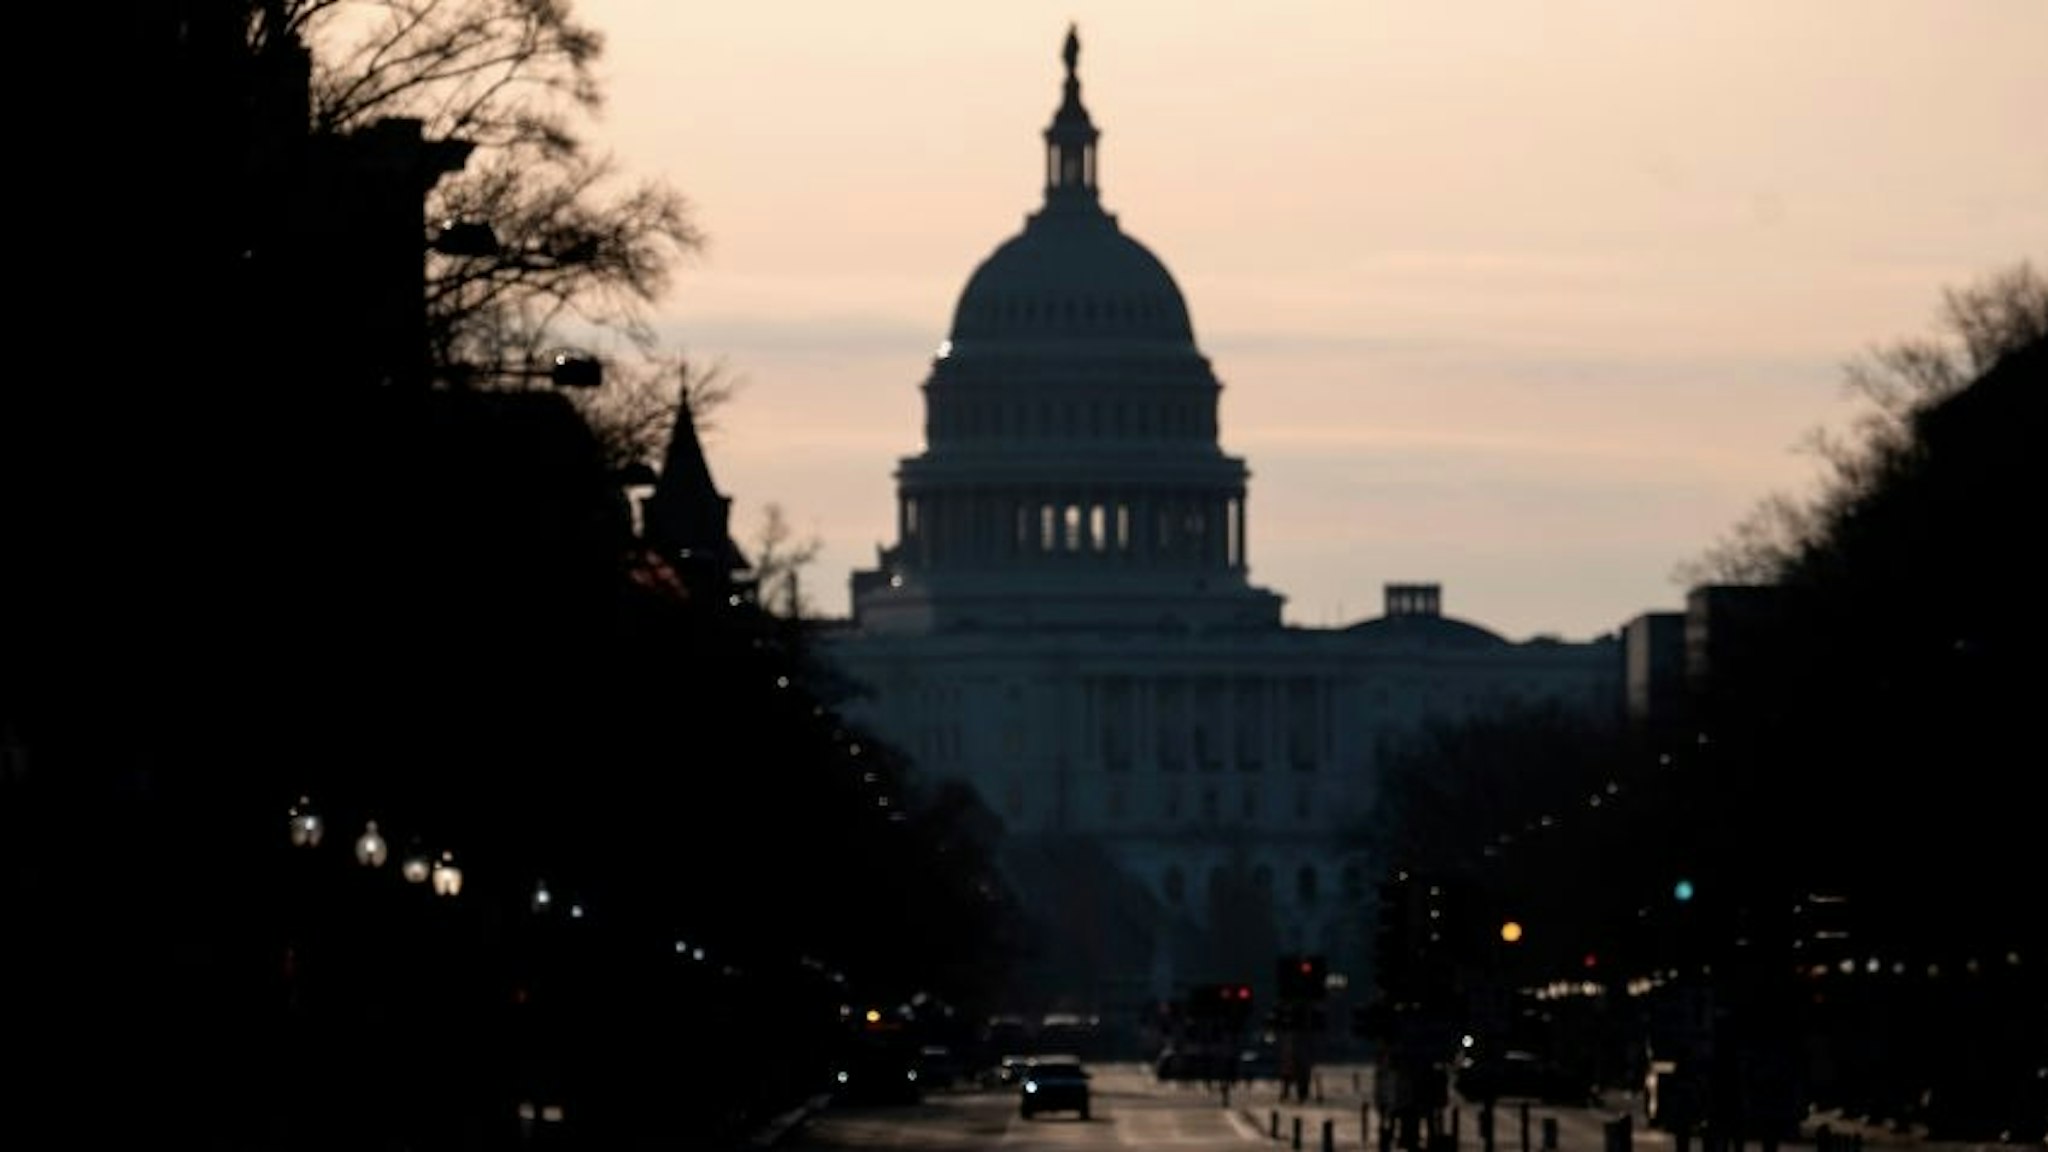 A woman walks on a empty street near the US Capitol as the sun rises in Washington, DC, on March 4, 2021. - Lawmakers and staff were advised to stay away from the US Capitol after the FBI and Homeland Security Department warned that violent militia groups and QAnon followers had discussed attacking the legislature on or about March 4. The FBI-Homeland Security bulletin said extremists are still motivated by unfounded Republican claims of widespread voter fraud in the November presidential election won by Democrat Joe Biden. (Photo by ANDREW CABALLERO-REYNOLDS / AFP) (Photo by ANDREW CABALLERO-REYNOLDS/AFP via Getty Images)